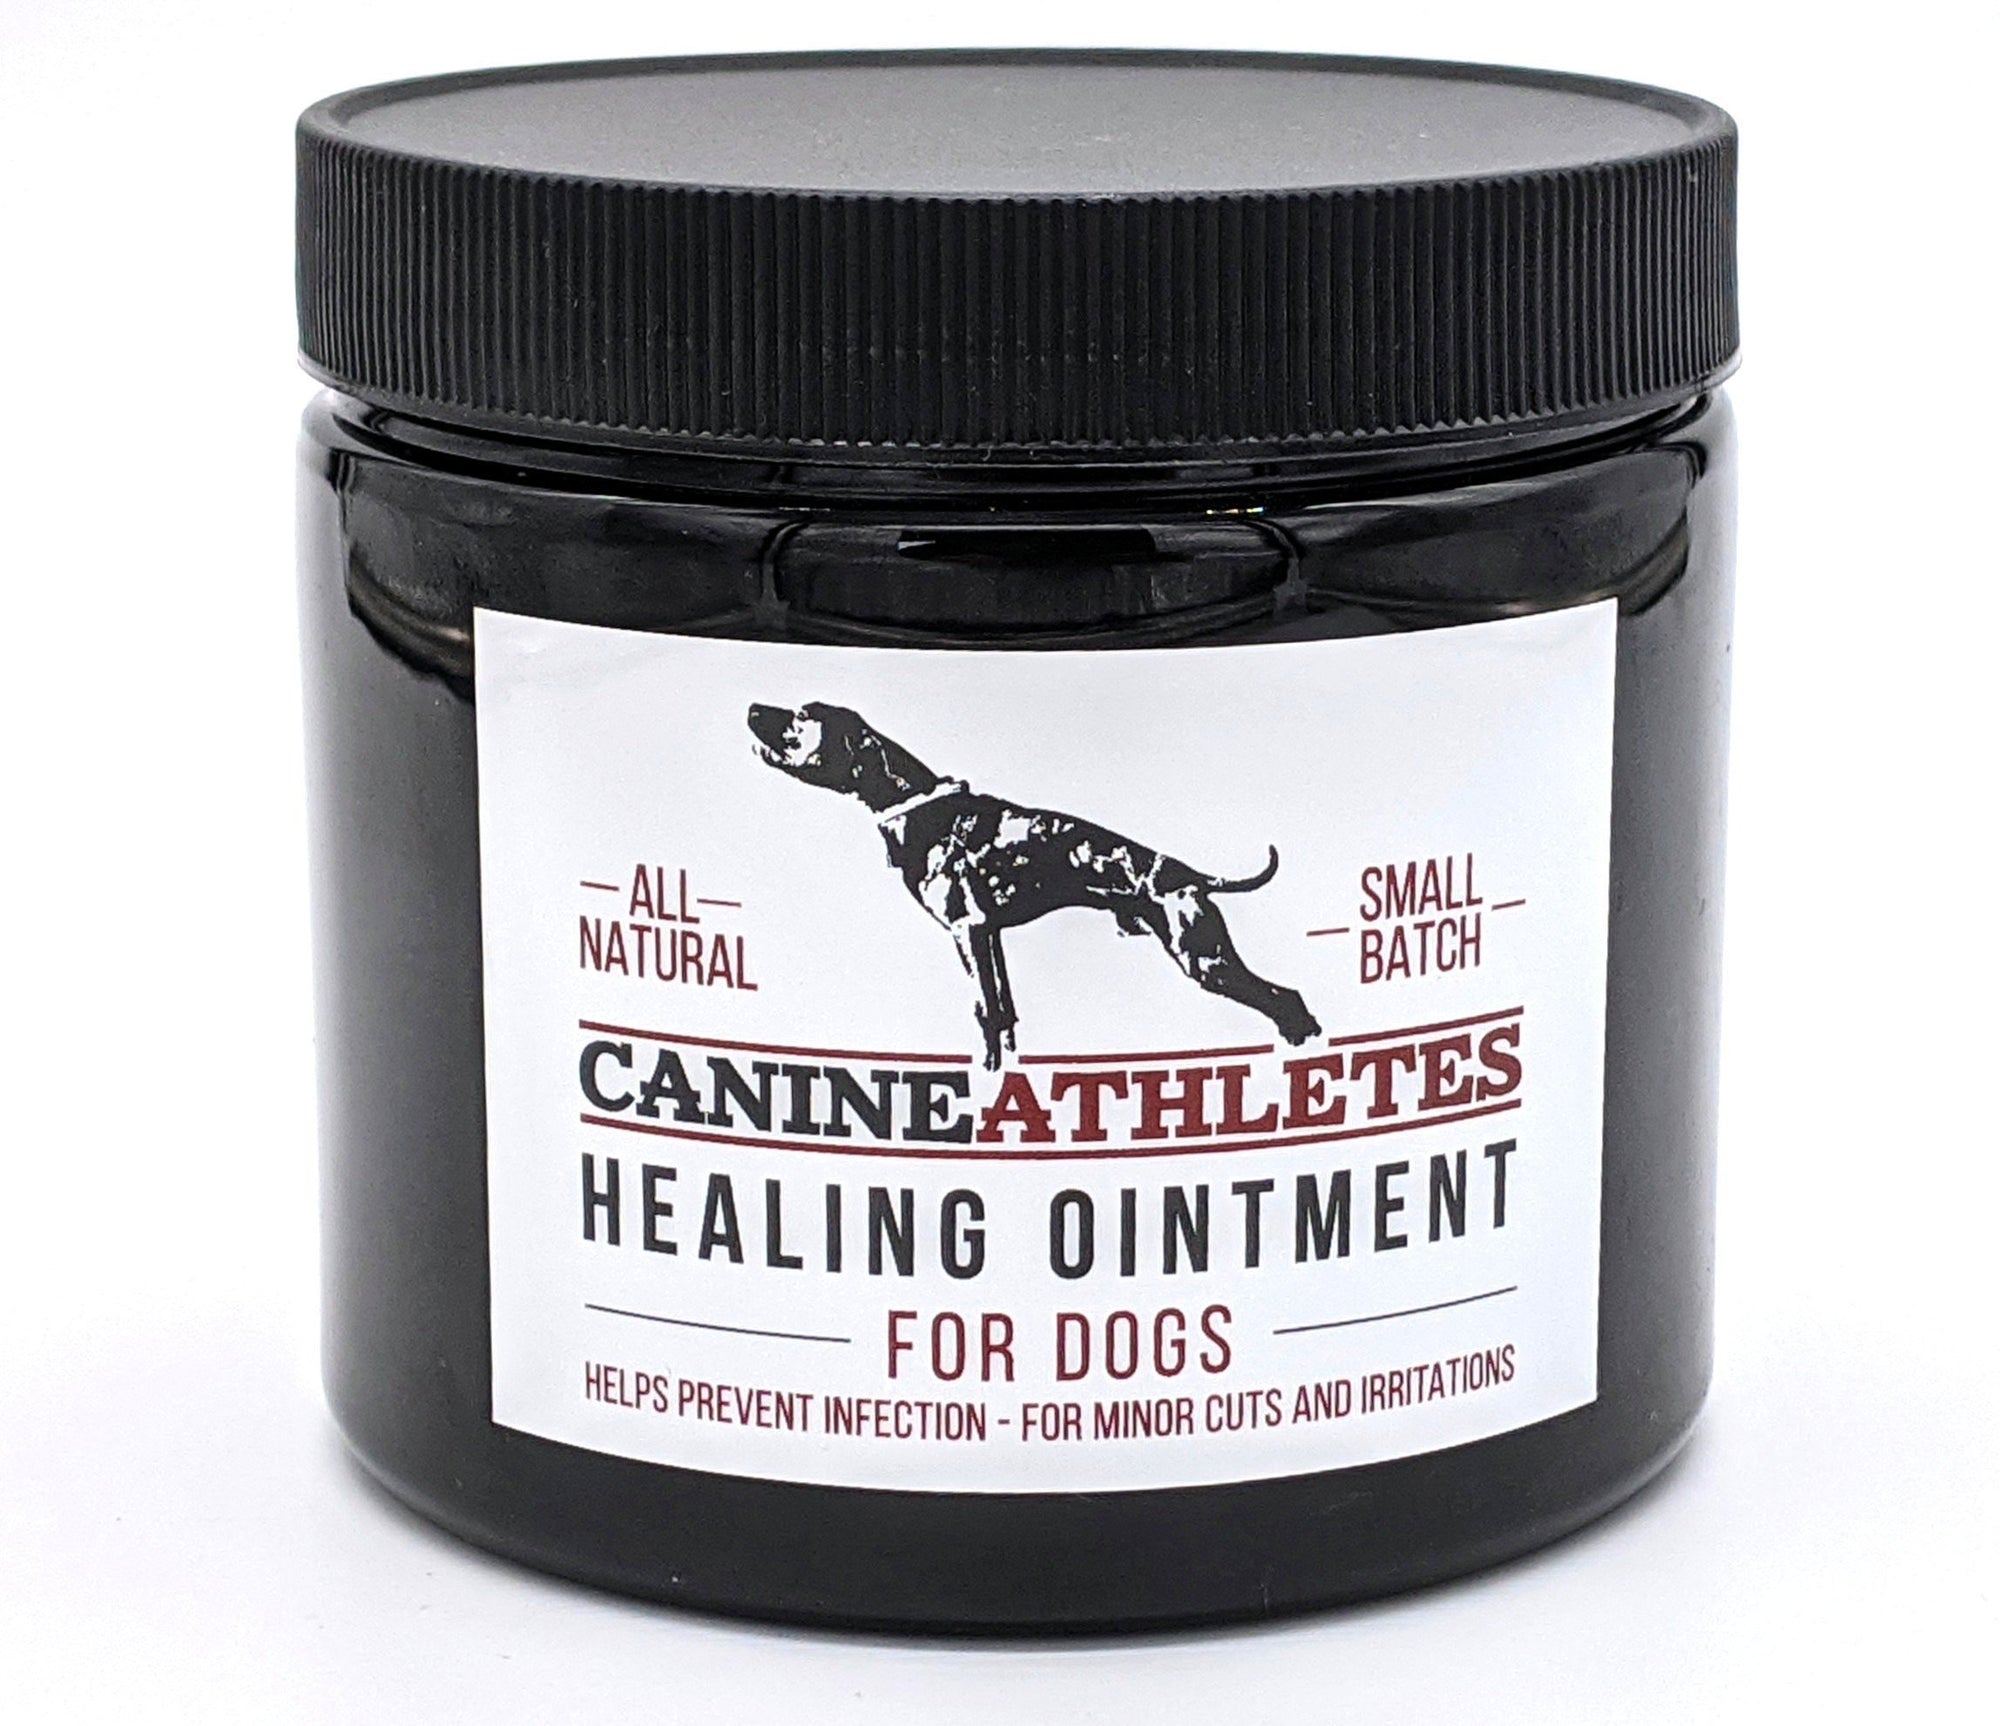 Canine Athletes All-Natural Healing Ointment Accessories canine-athletes